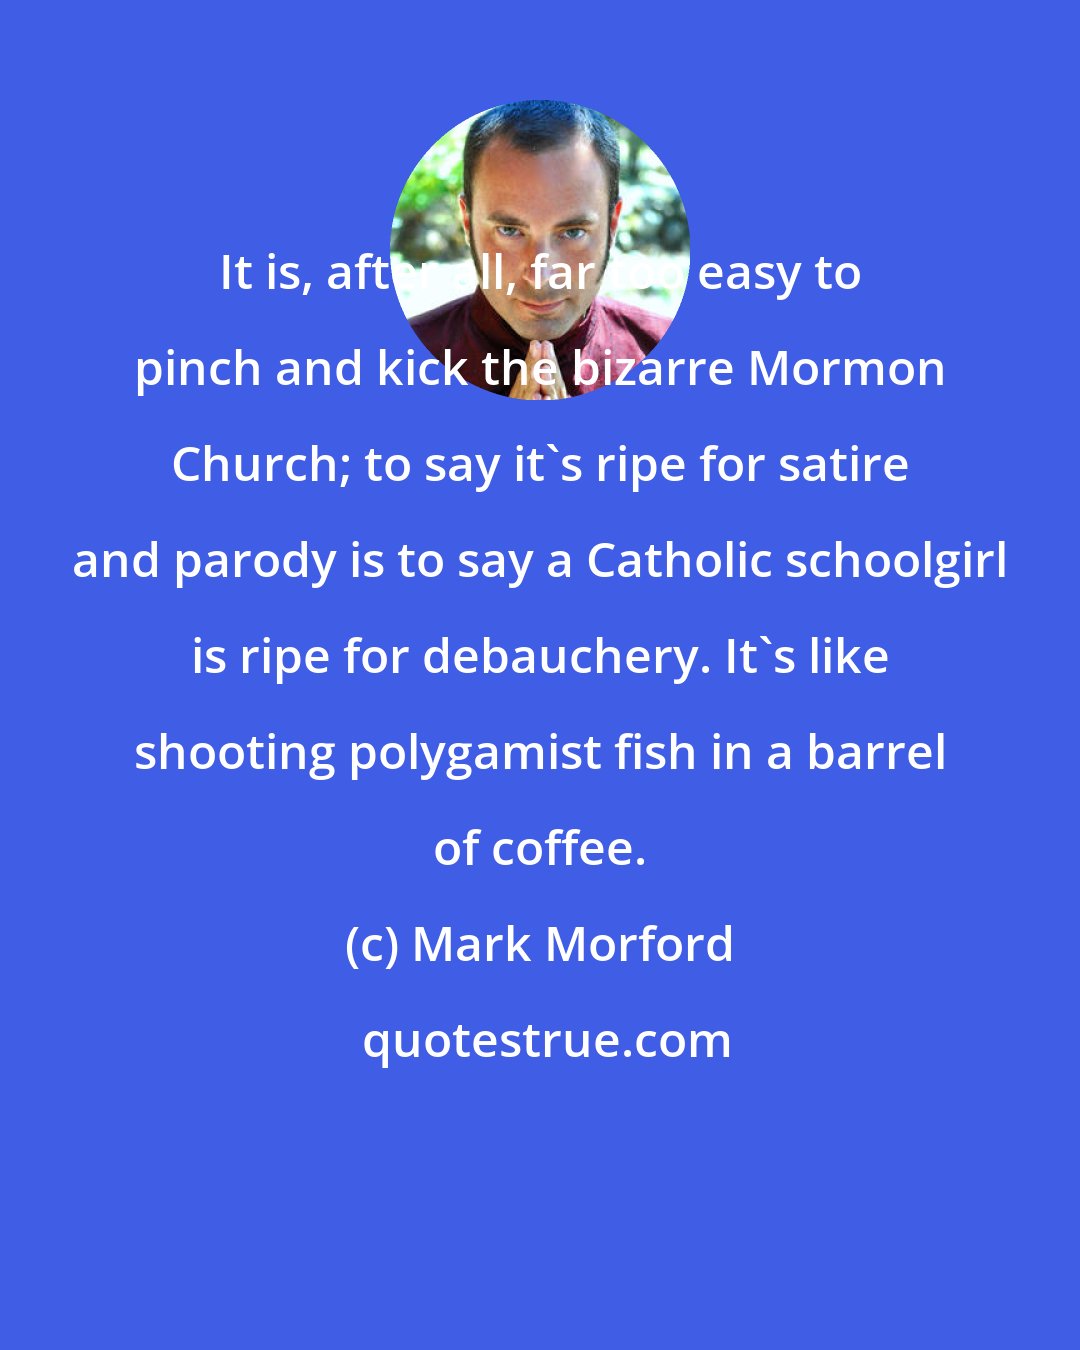 Mark Morford: It is, after all, far too easy to pinch and kick the bizarre Mormon Church; to say it's ripe for satire and parody is to say a Catholic schoolgirl is ripe for debauchery. It's like shooting polygamist fish in a barrel of coffee.